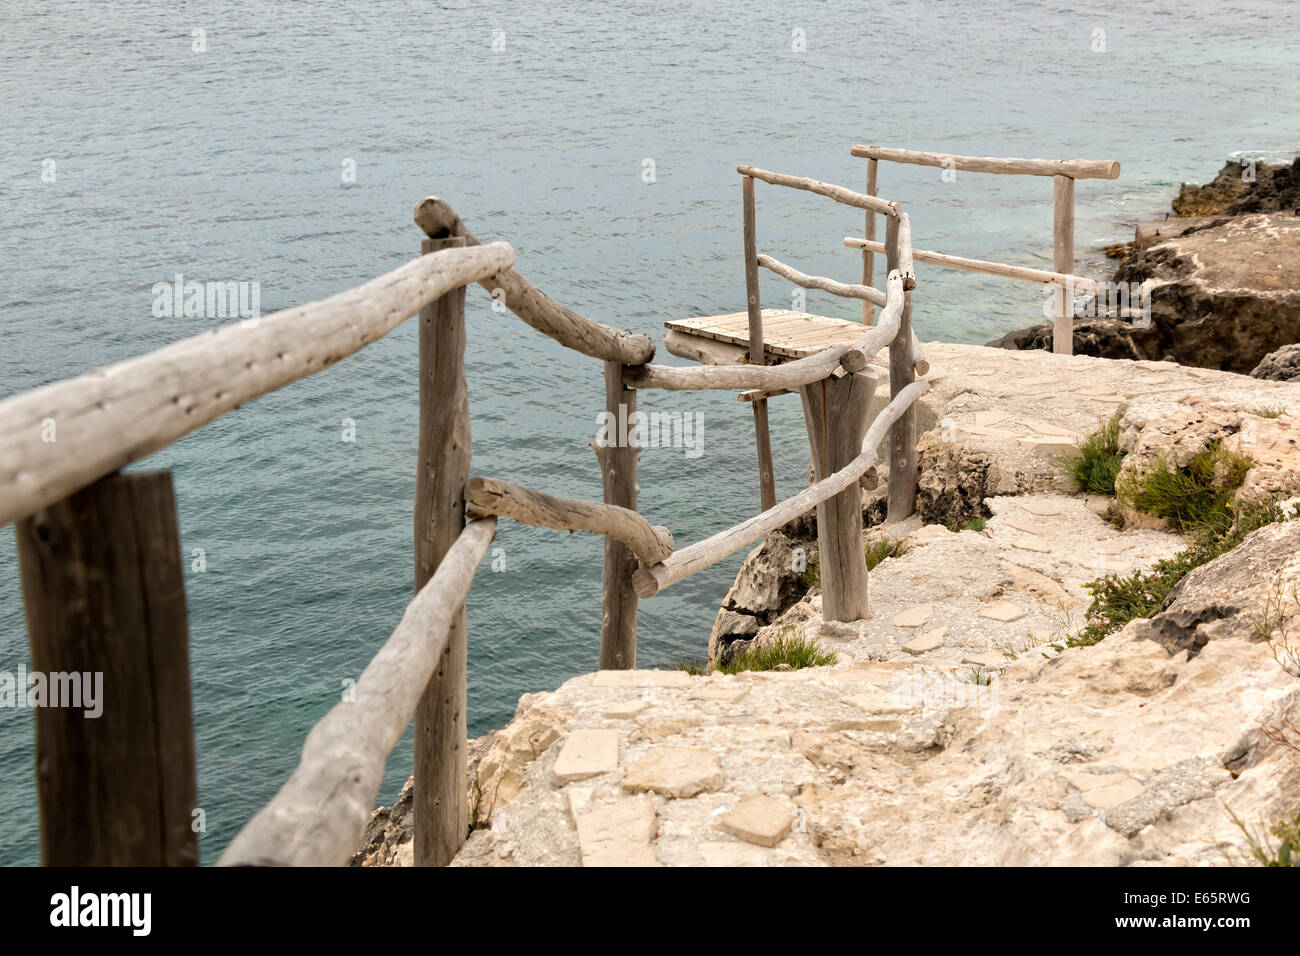 Wooden dock and handrail at a seaside cliff Stock Photo